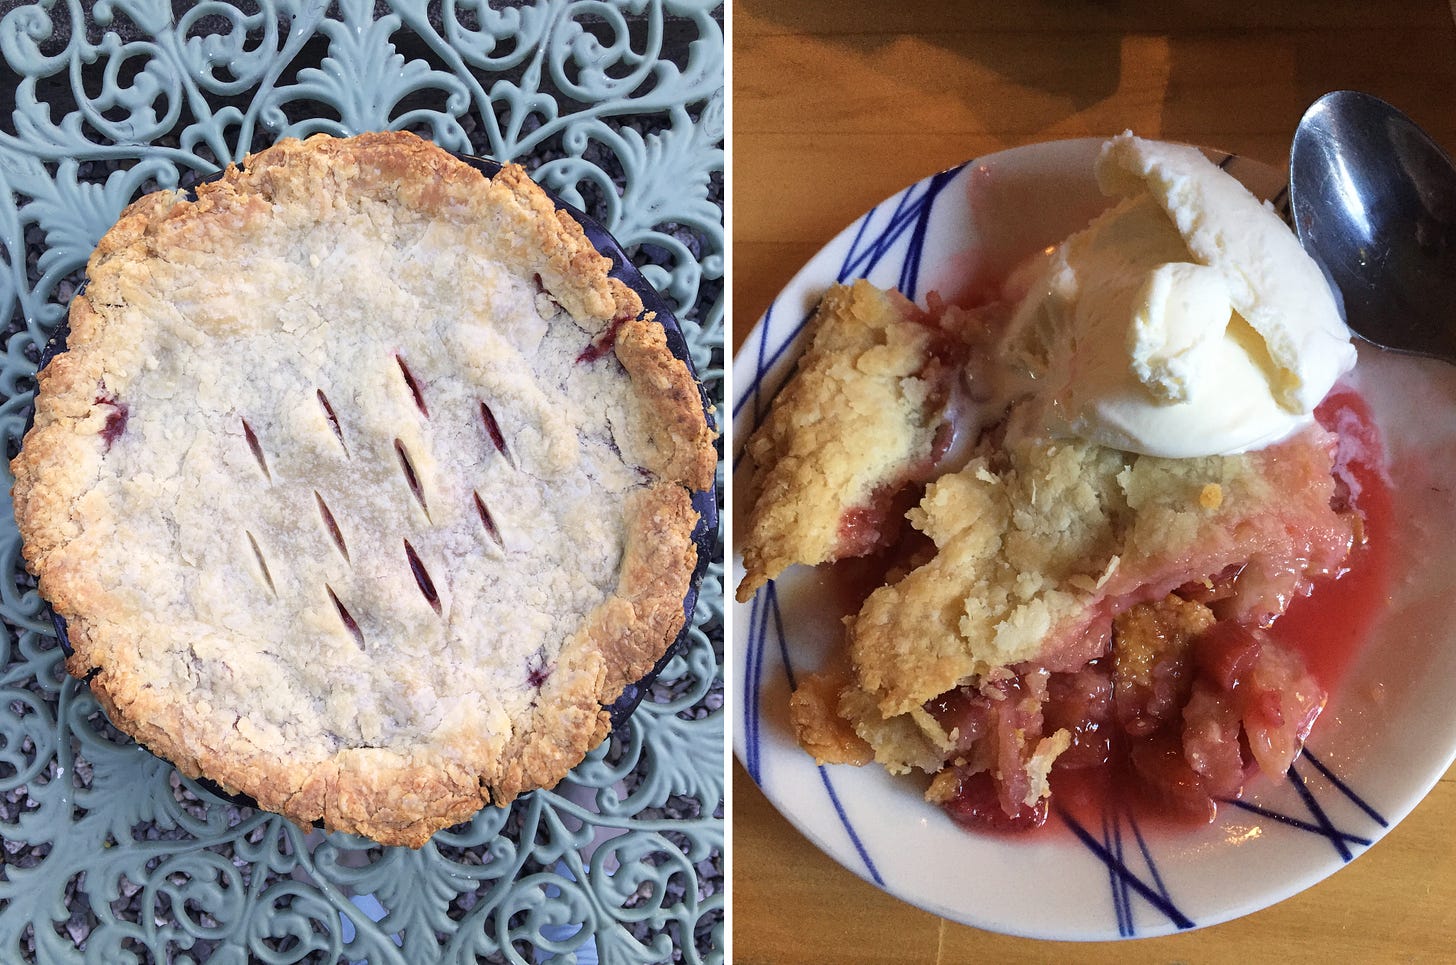 Left image: a pie with several vents cut across the top rests on a green wrought-iron table. Right image: A messy, juicy, slice of strawberry rhubarb pie with a scoop of vanilla ice cream melting on top.